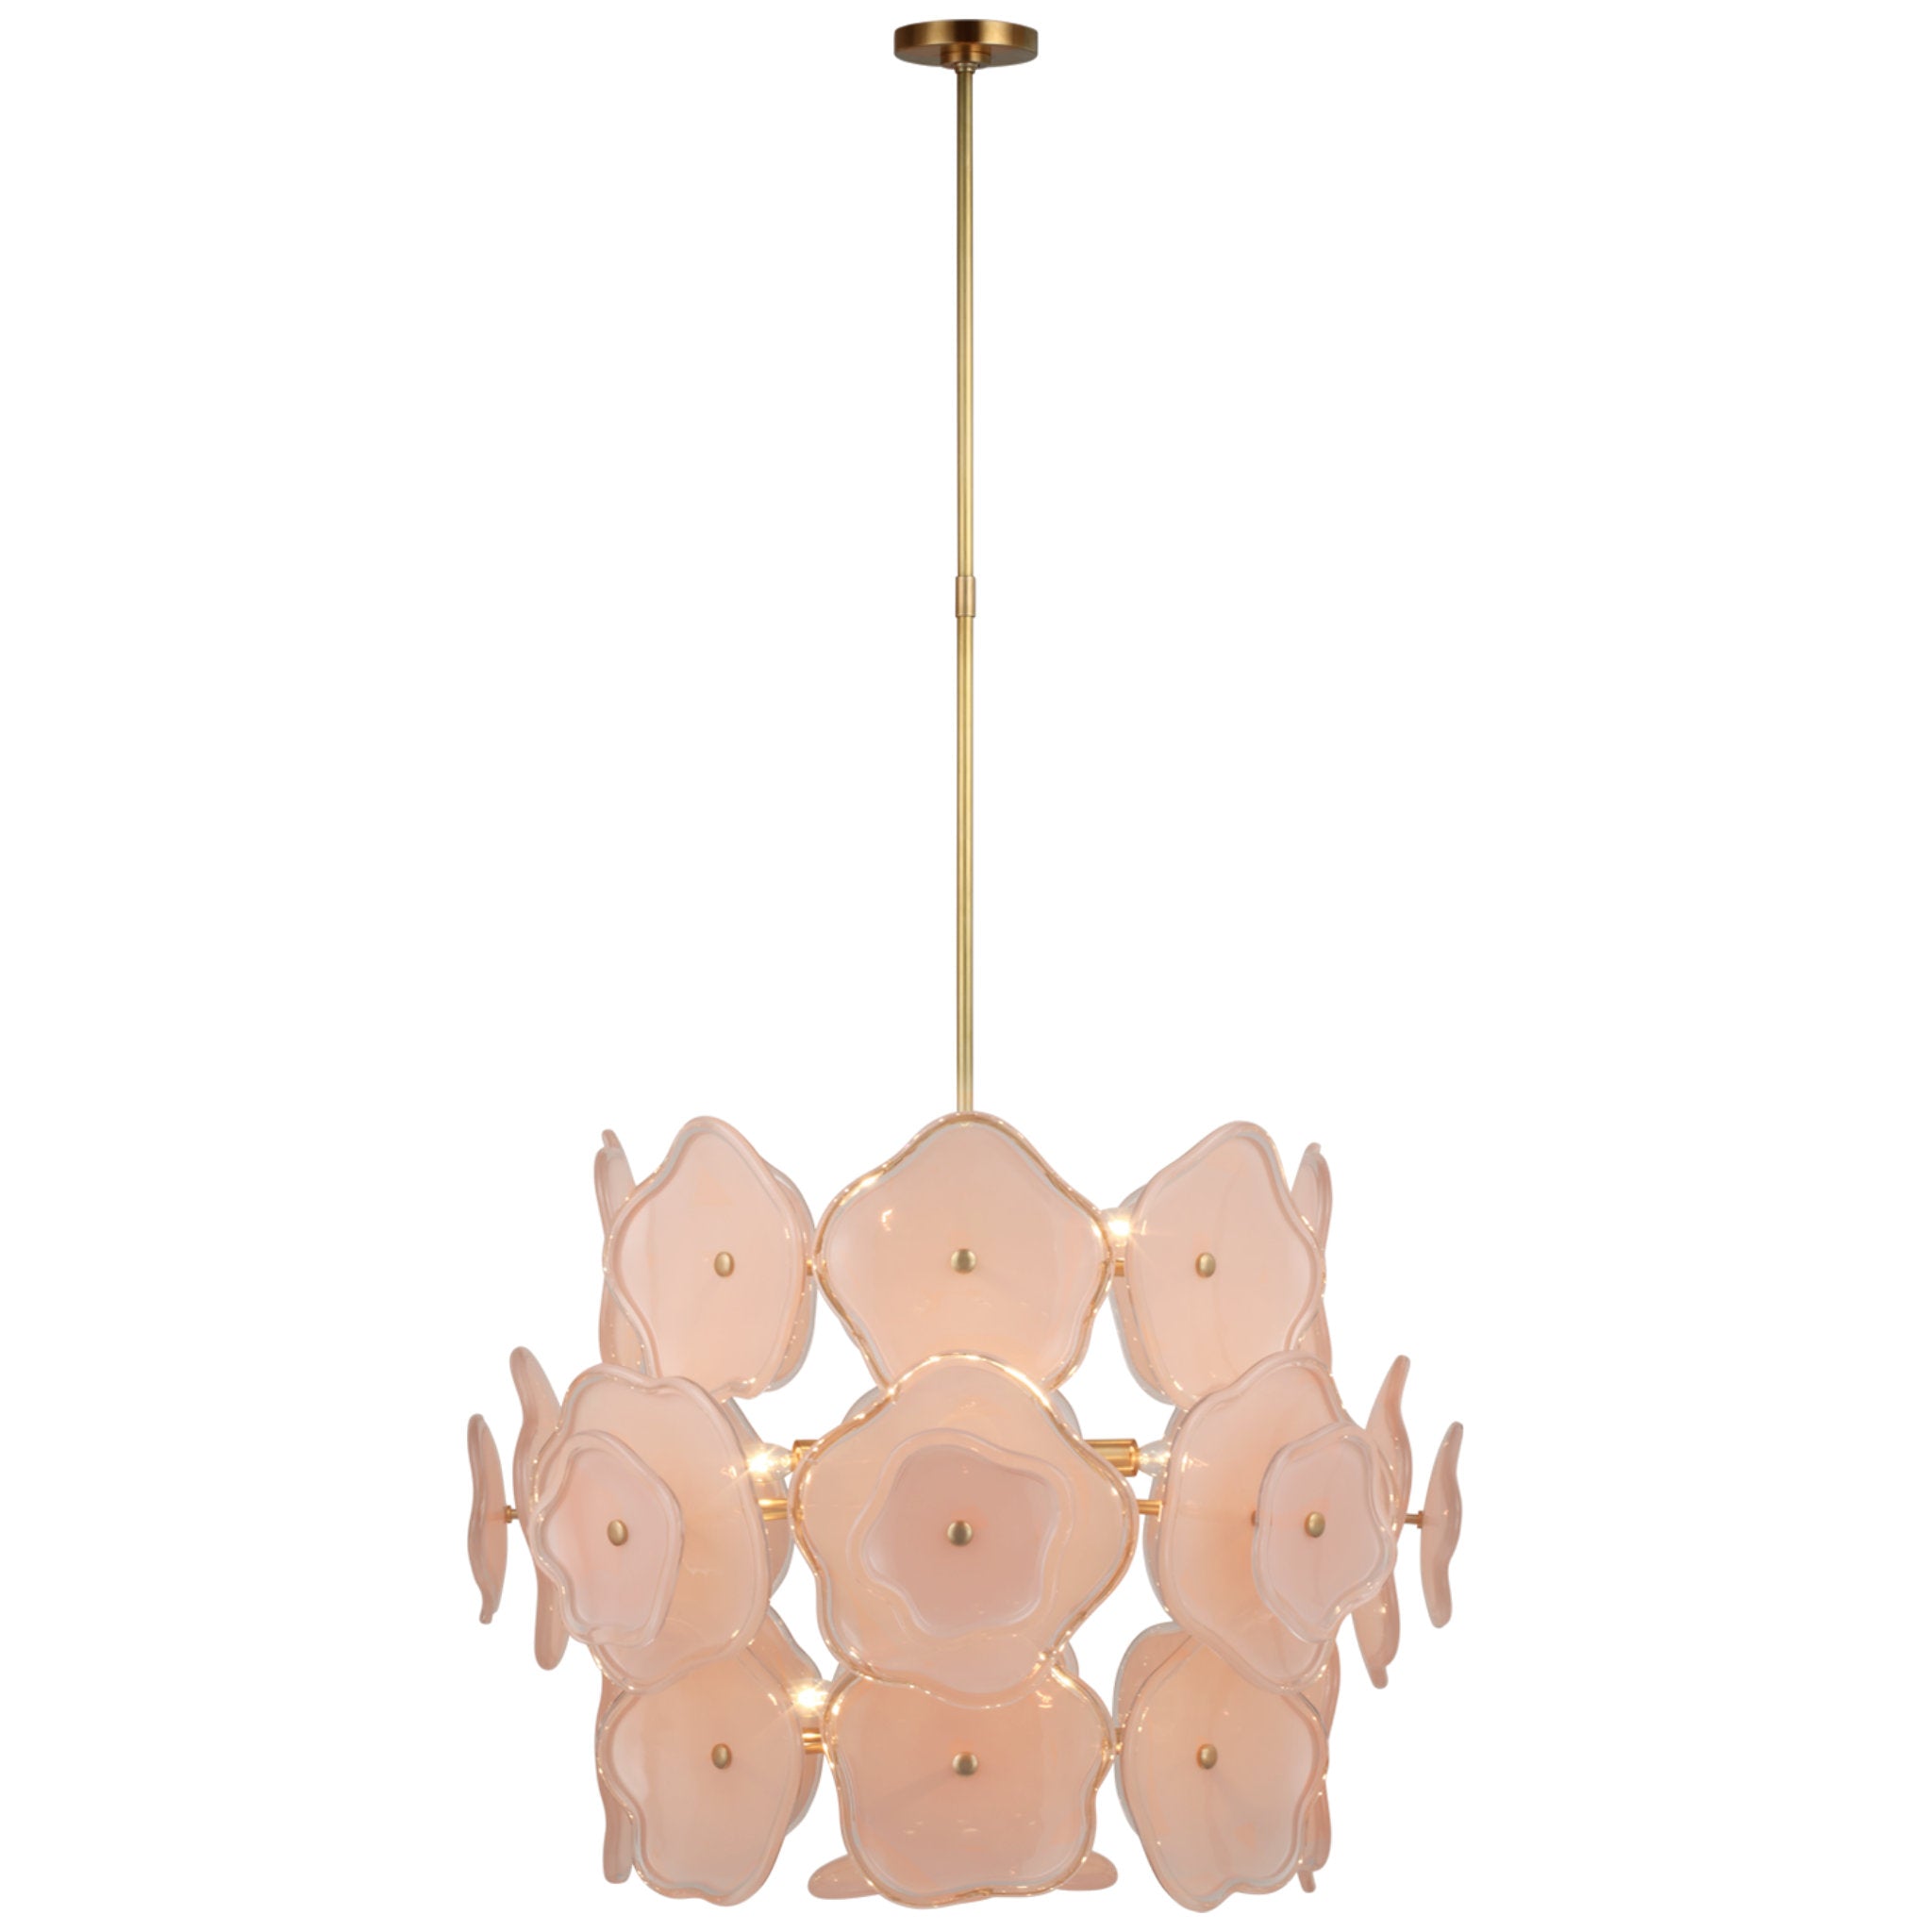 kate spade new york Leighton Large Barrel Chandelier in Soft Brass with Blush Tinted Glass